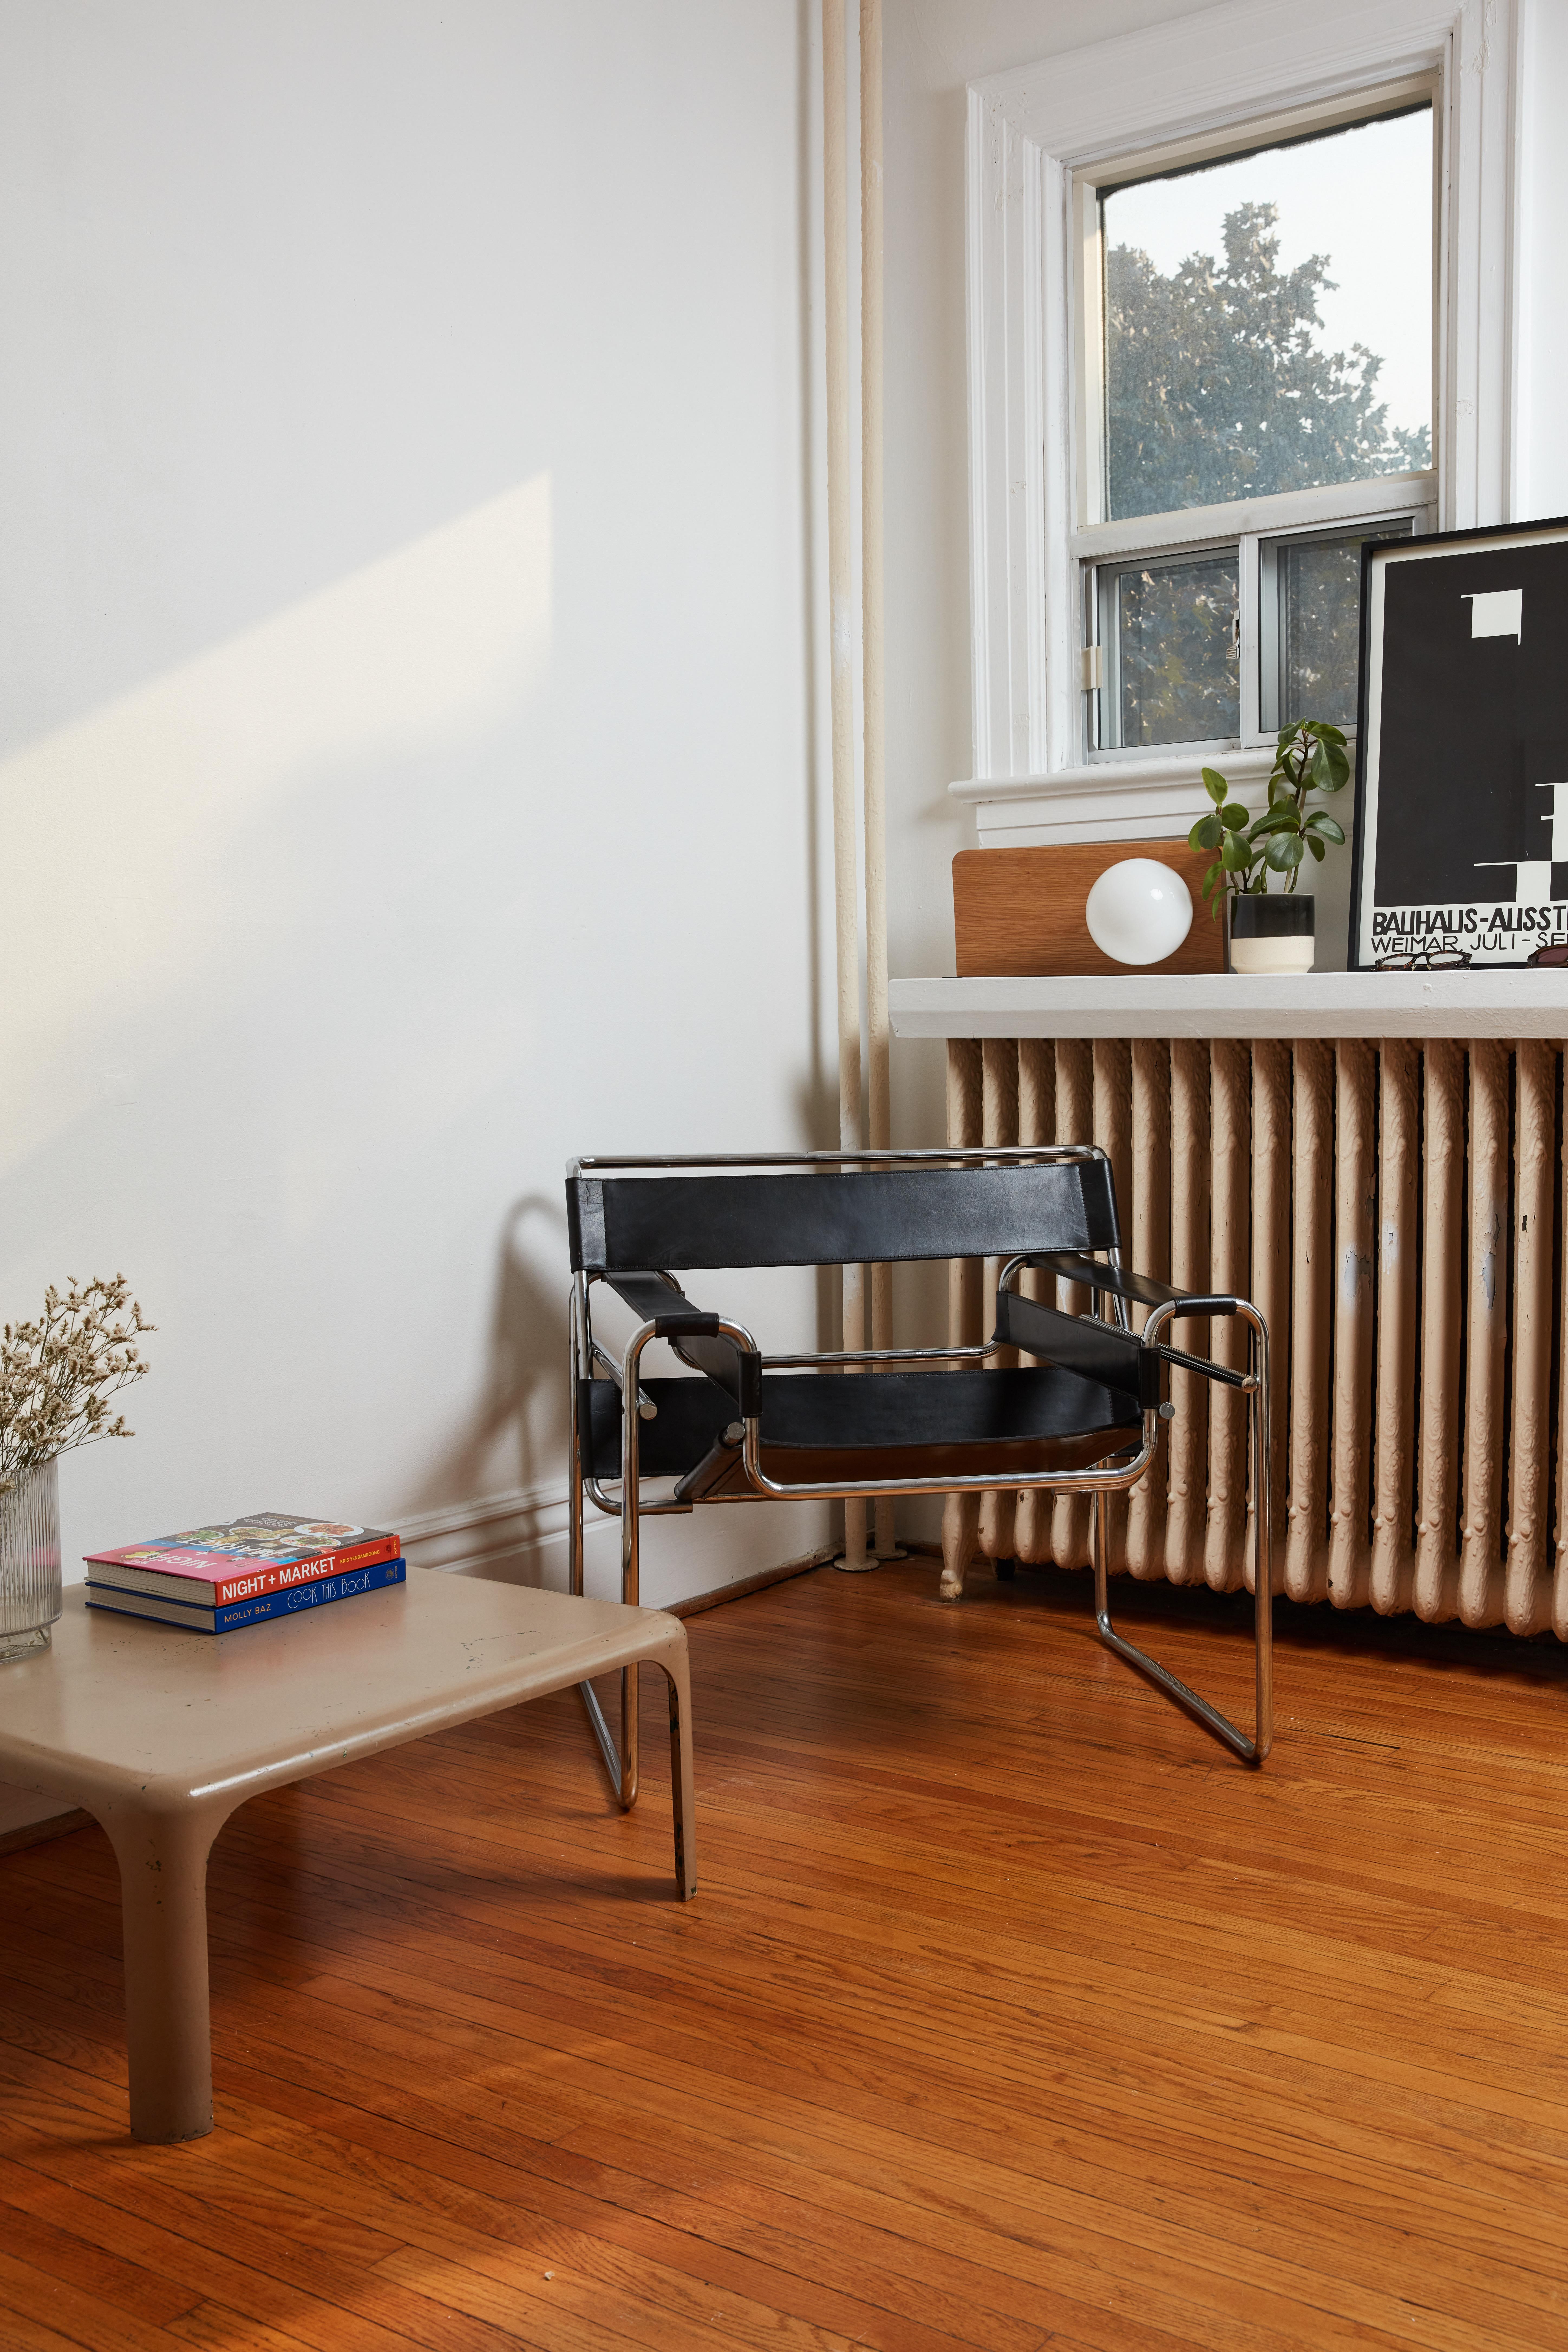 This Wassily Chair, designed by Marcel Breuer during his time at the Bauhaus, is an icon of modern design and of minimalist design. With its signature chrome-plated tubular frame and artfully arranged leather straps, this piece has been an enduring